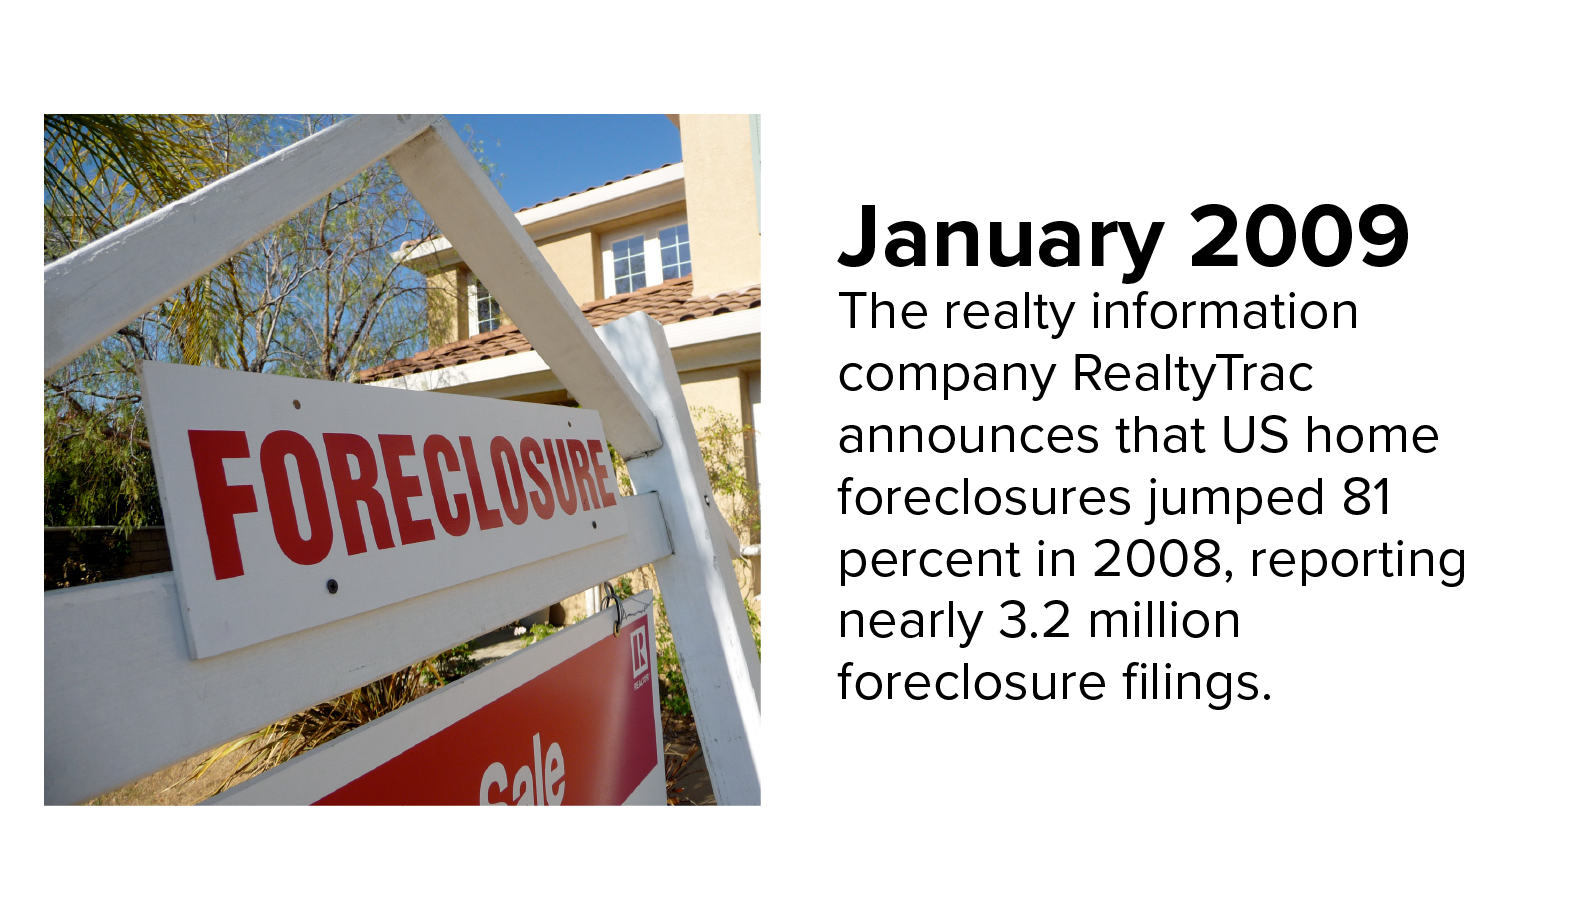 Photo of a foreclosure sign outside a home. US home foreclosures jumped 81 percent in 2008. 